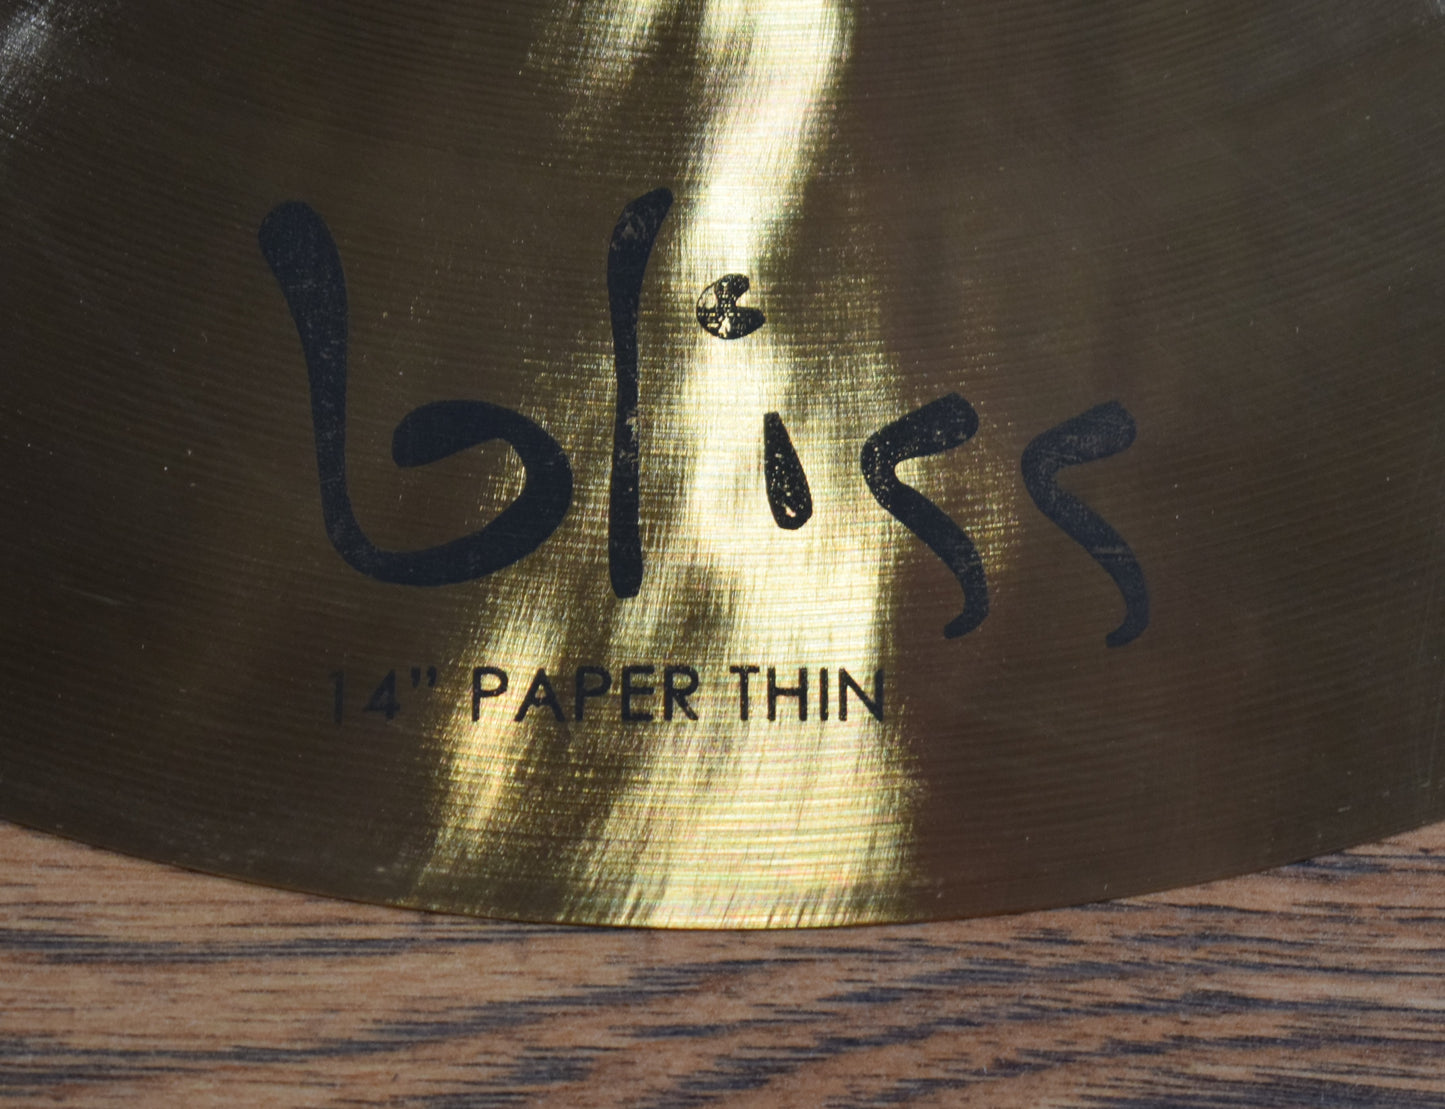 Dream Cymbals BPT14 Bliss Hand Forged & Hammered 14" Paper Thin Crash